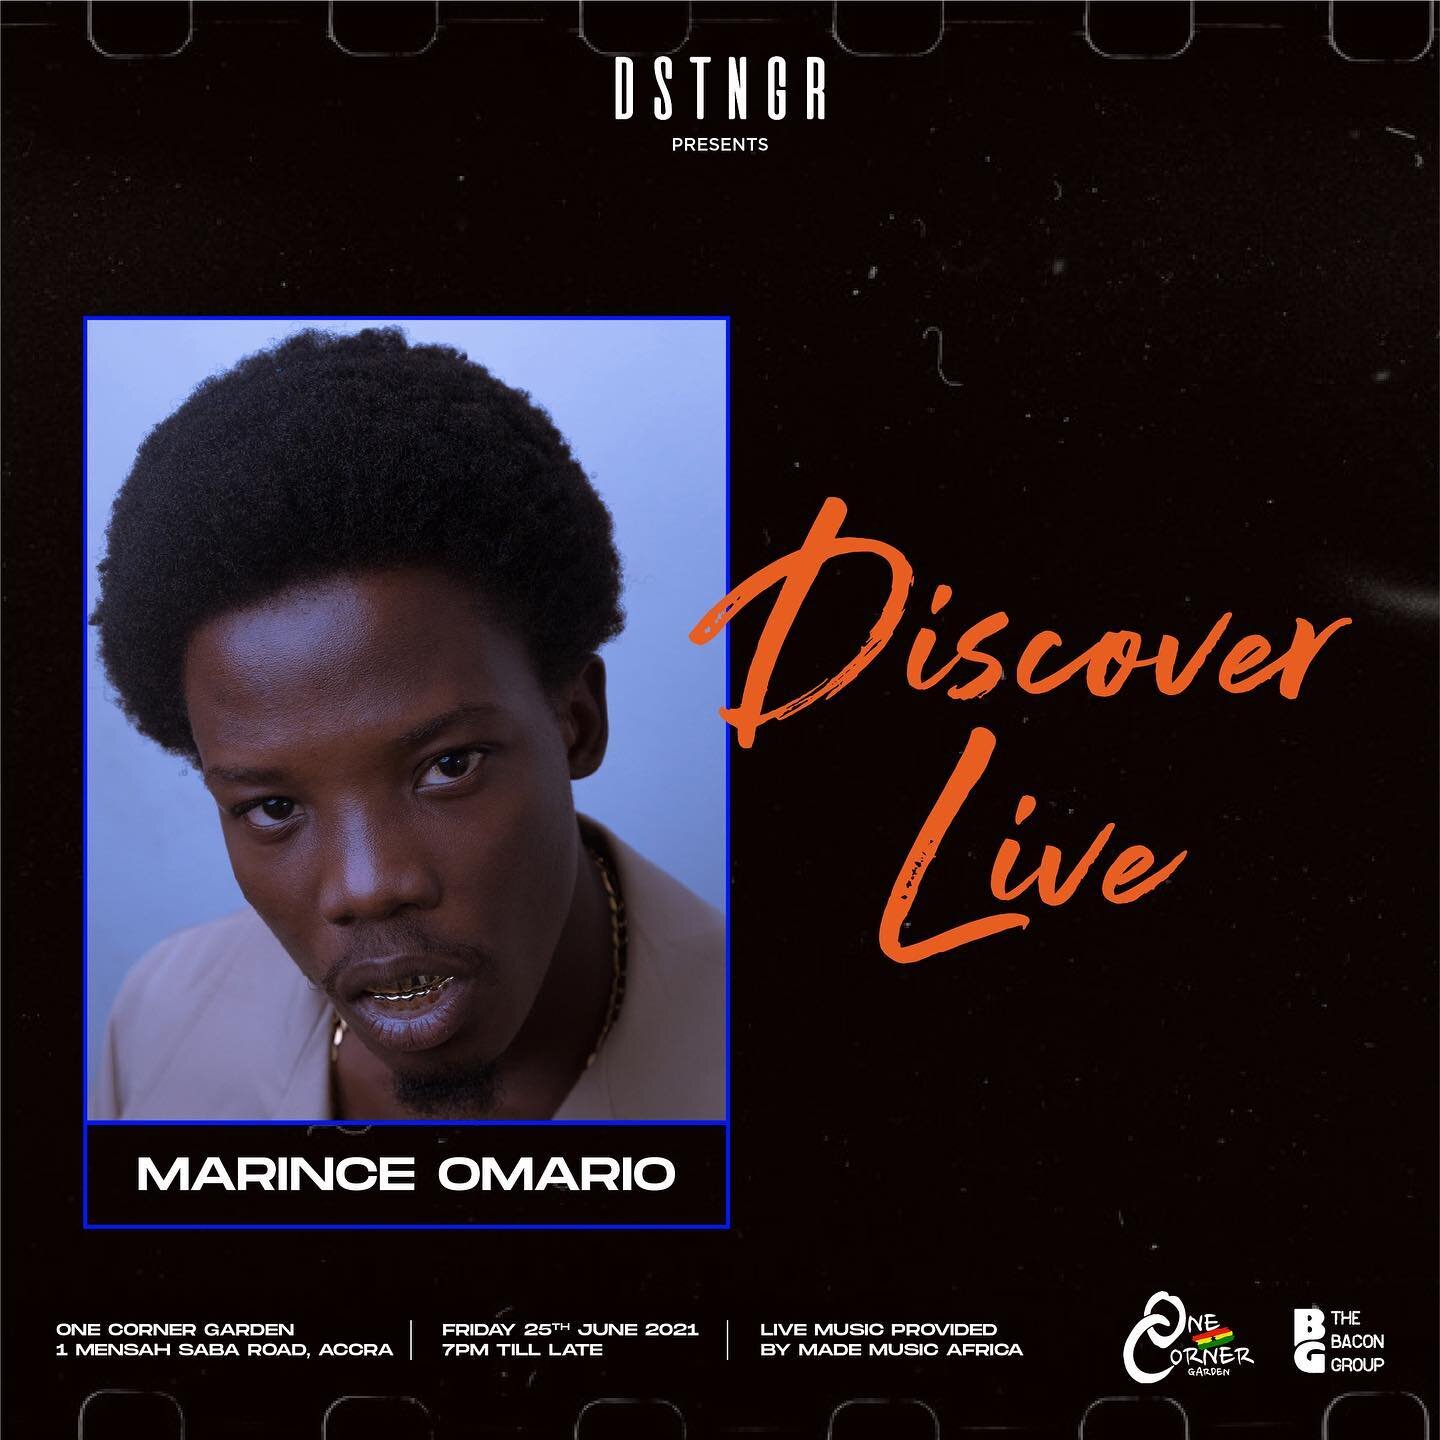 This FRIDAY! One of Accra&rsquo;s most exciting emerging talents @marinceomario introduces us to his world of &lsquo;fu&rsquo; for &lsquo;DISCOVER LIVE&rsquo; at @onecornergh!

FREE ENTRY! Doors open at 7PM! 

Swipe left to see his limited edition &l